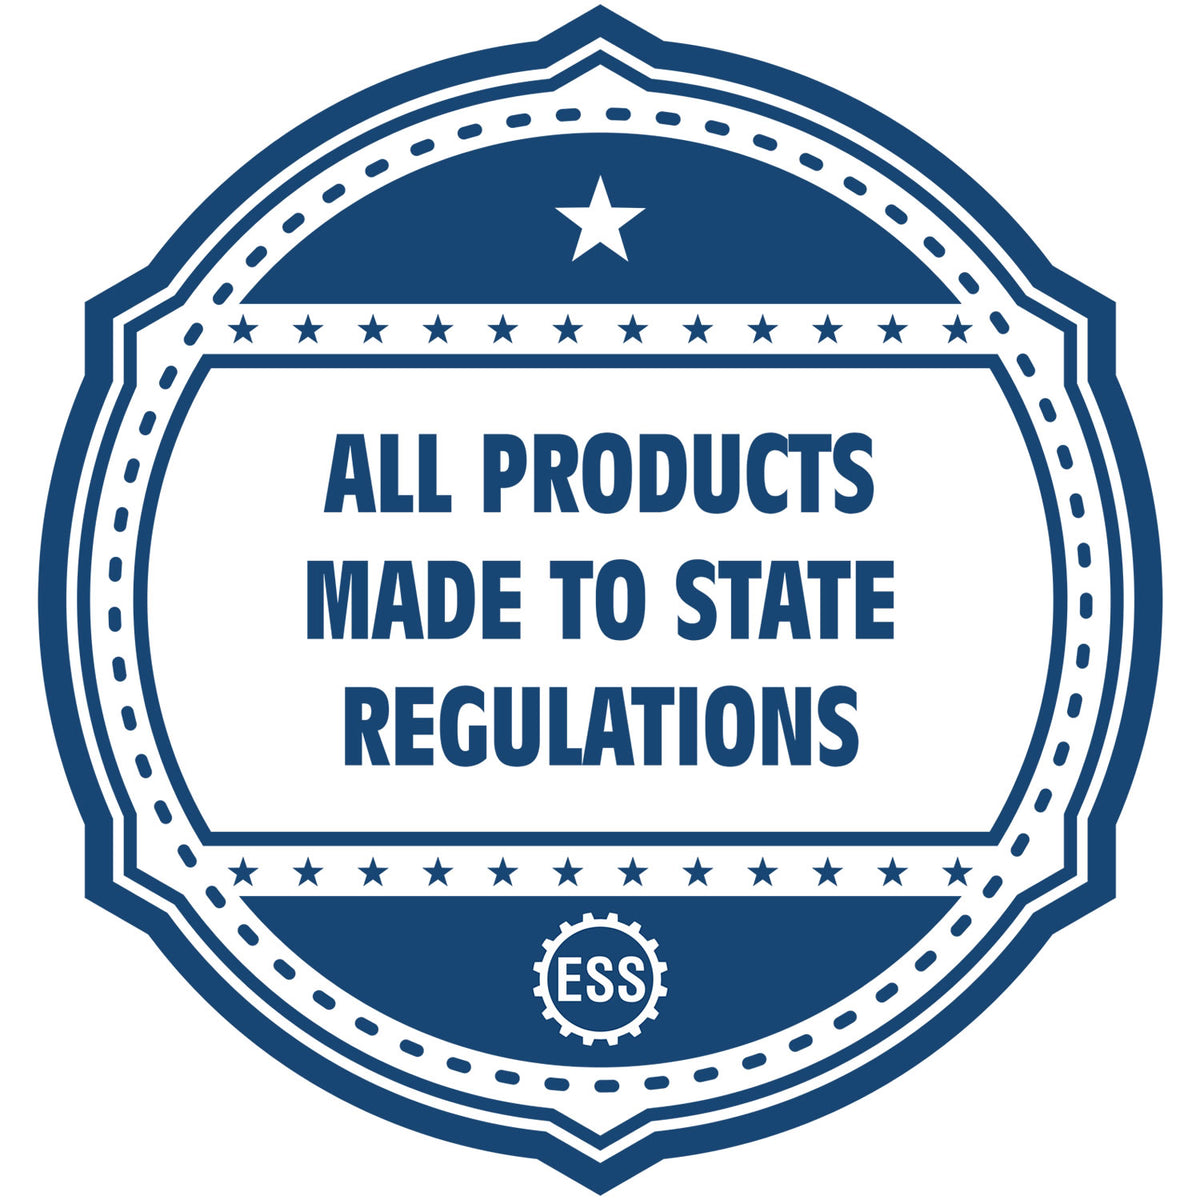 An icon or badge element for the State of California Extended Long Reach Engineer Seal showing that this product is made in compliance with state regulations.